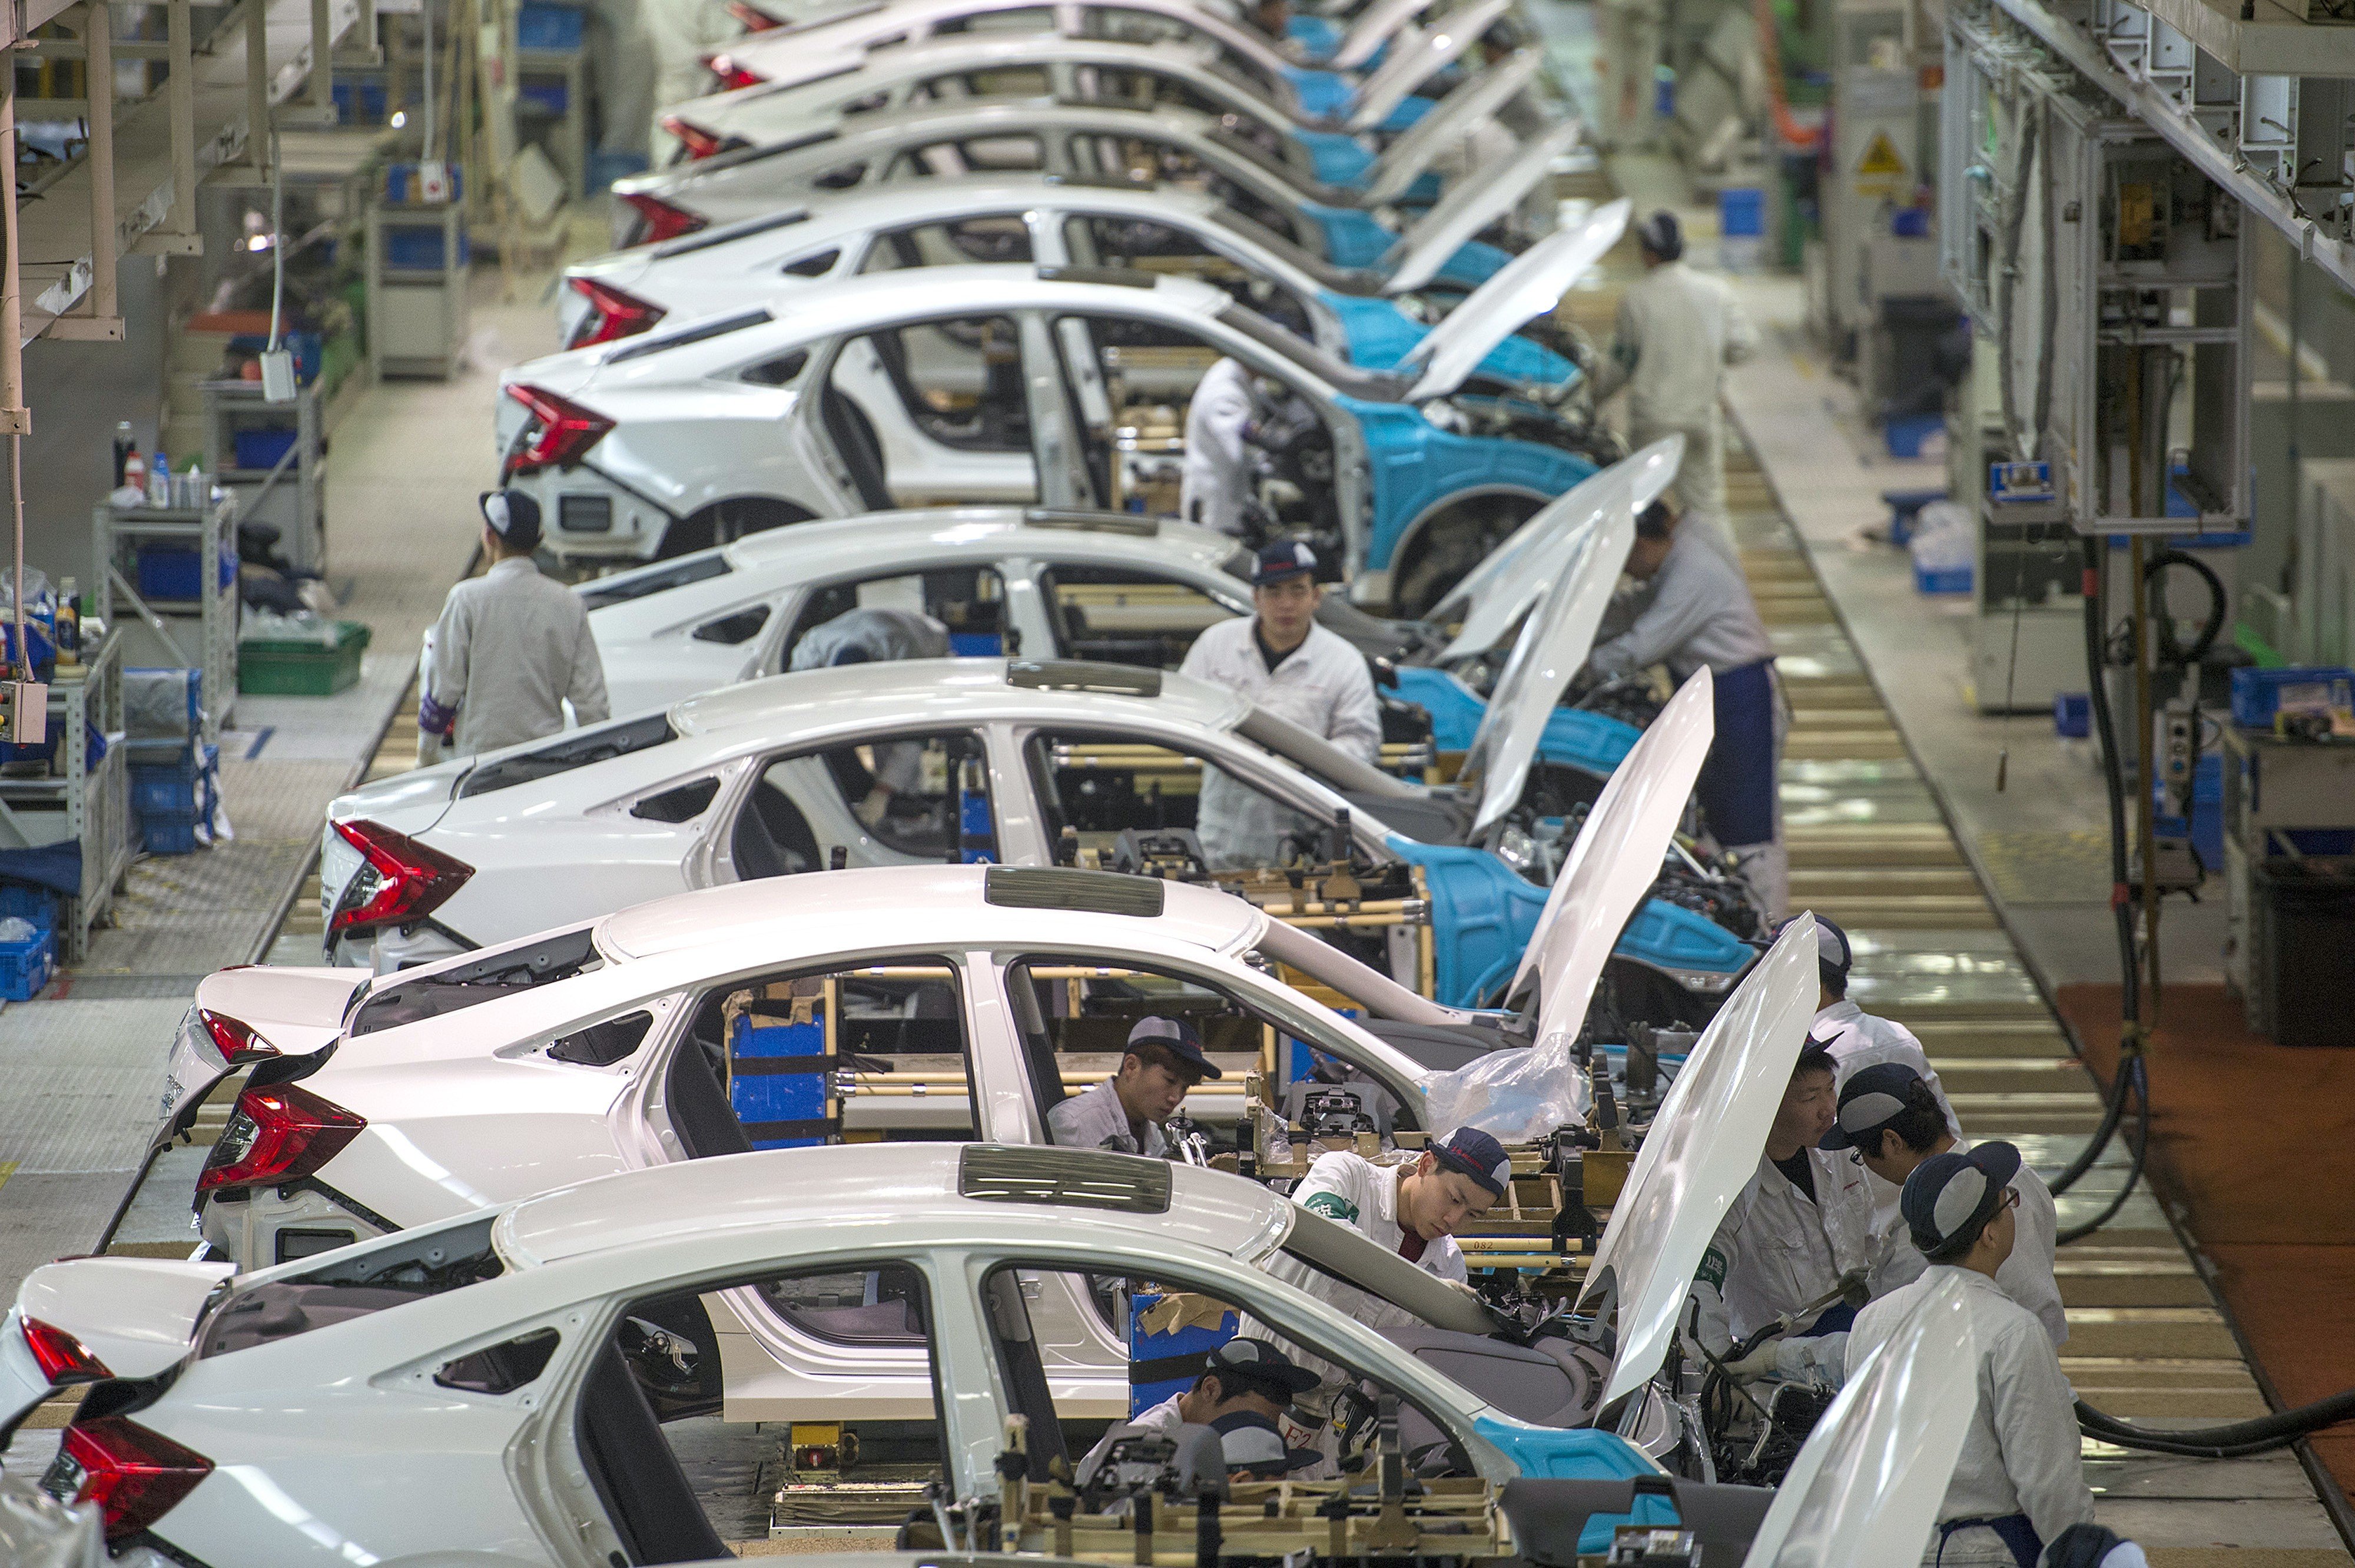 Workers assemble Honda Civics on an assembly line at a Dongfeng Honda automotive plant in Wuhan in central China's Hubei province on February 6, 2017. Photo: Chinatopix via AP